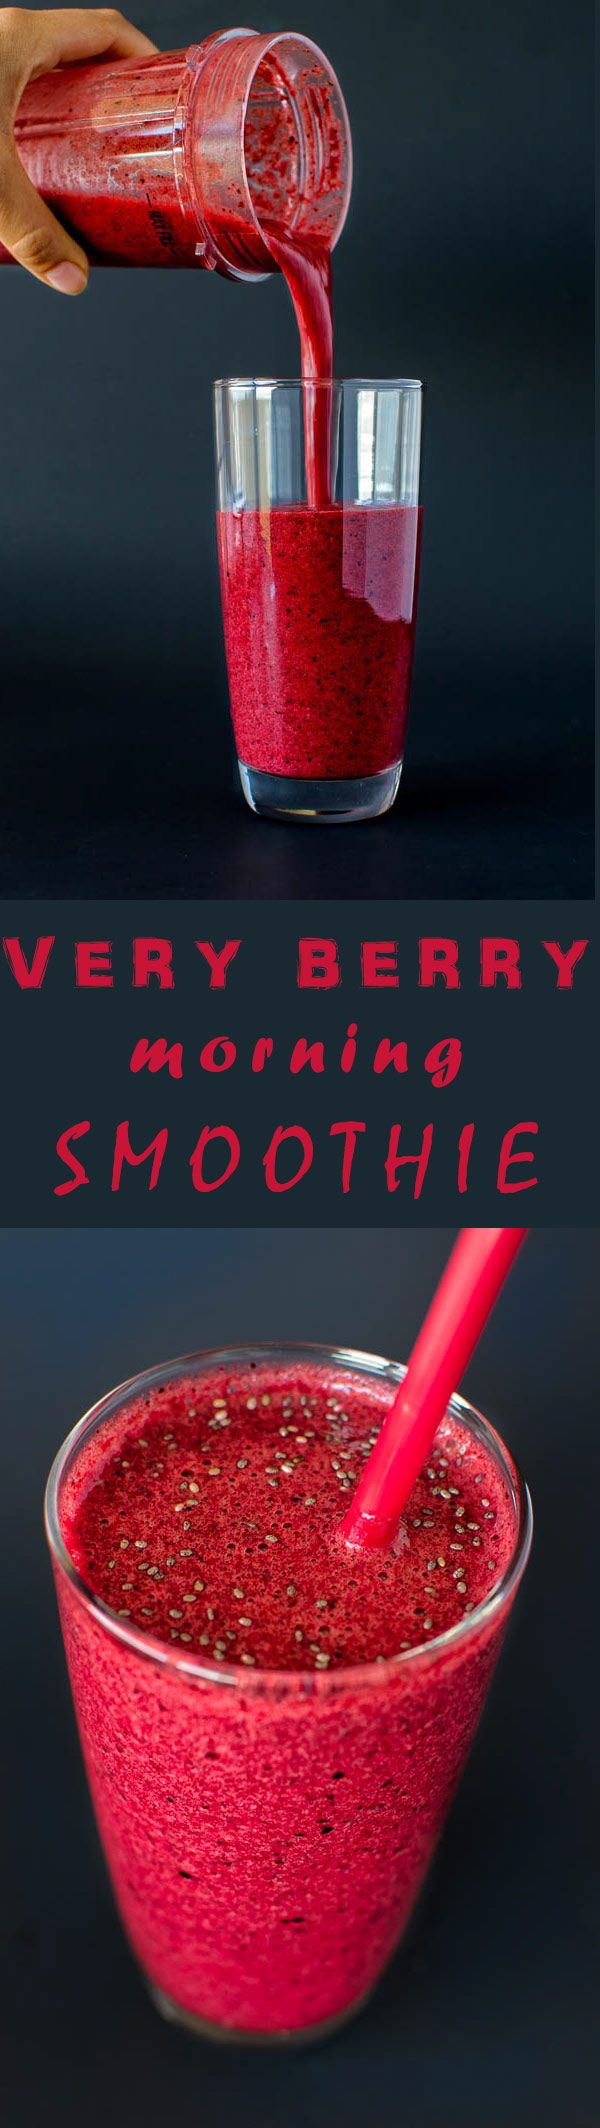 Very berry morning smoothie